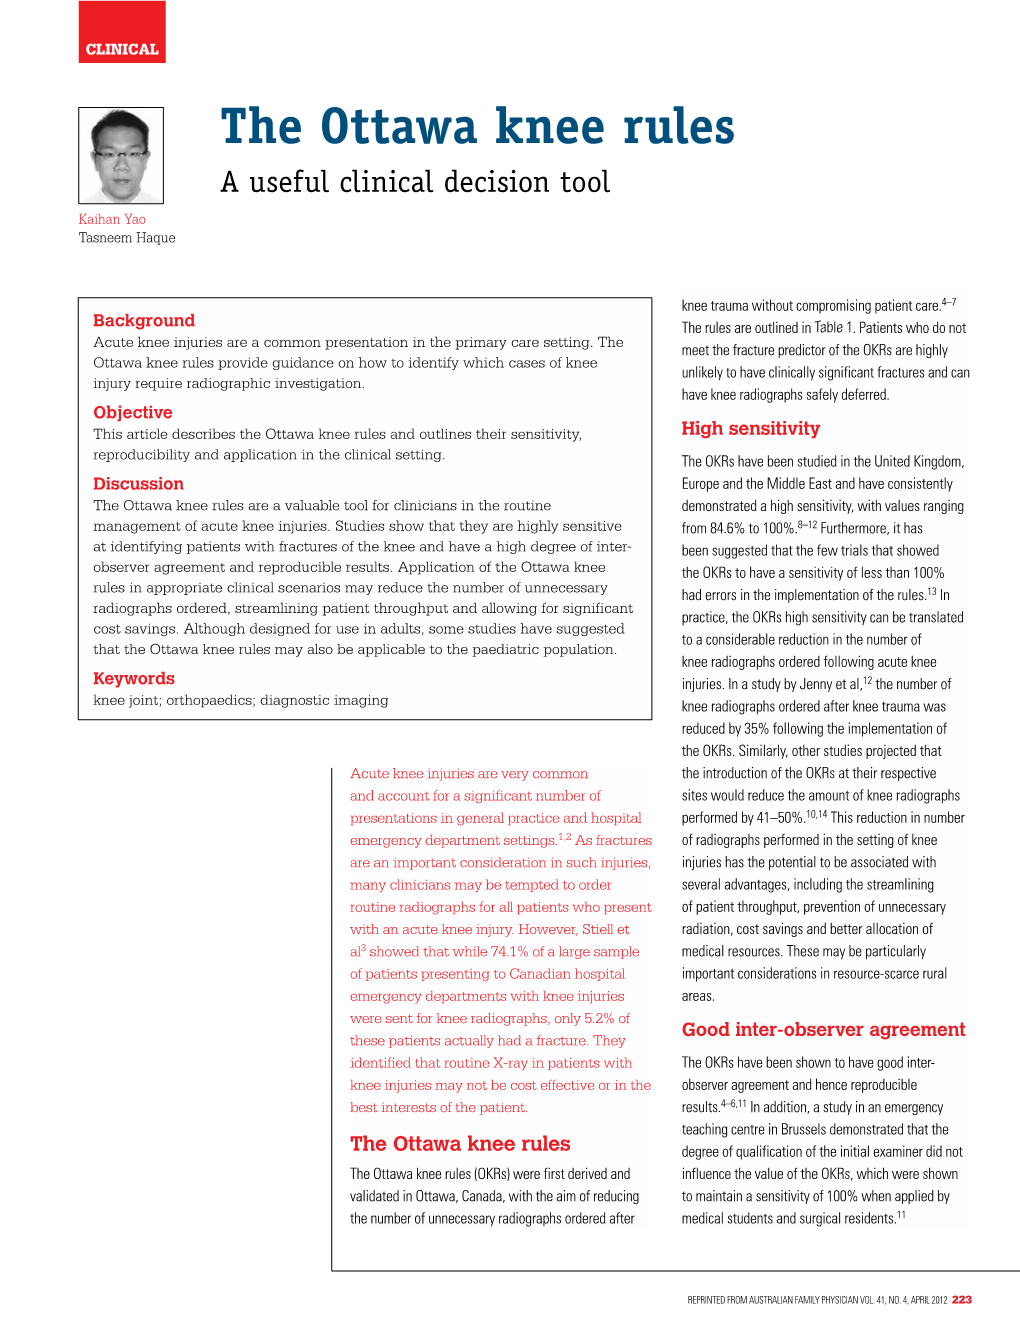 The Ottawa Knee Rules – a Useful Clinical Decision Tool